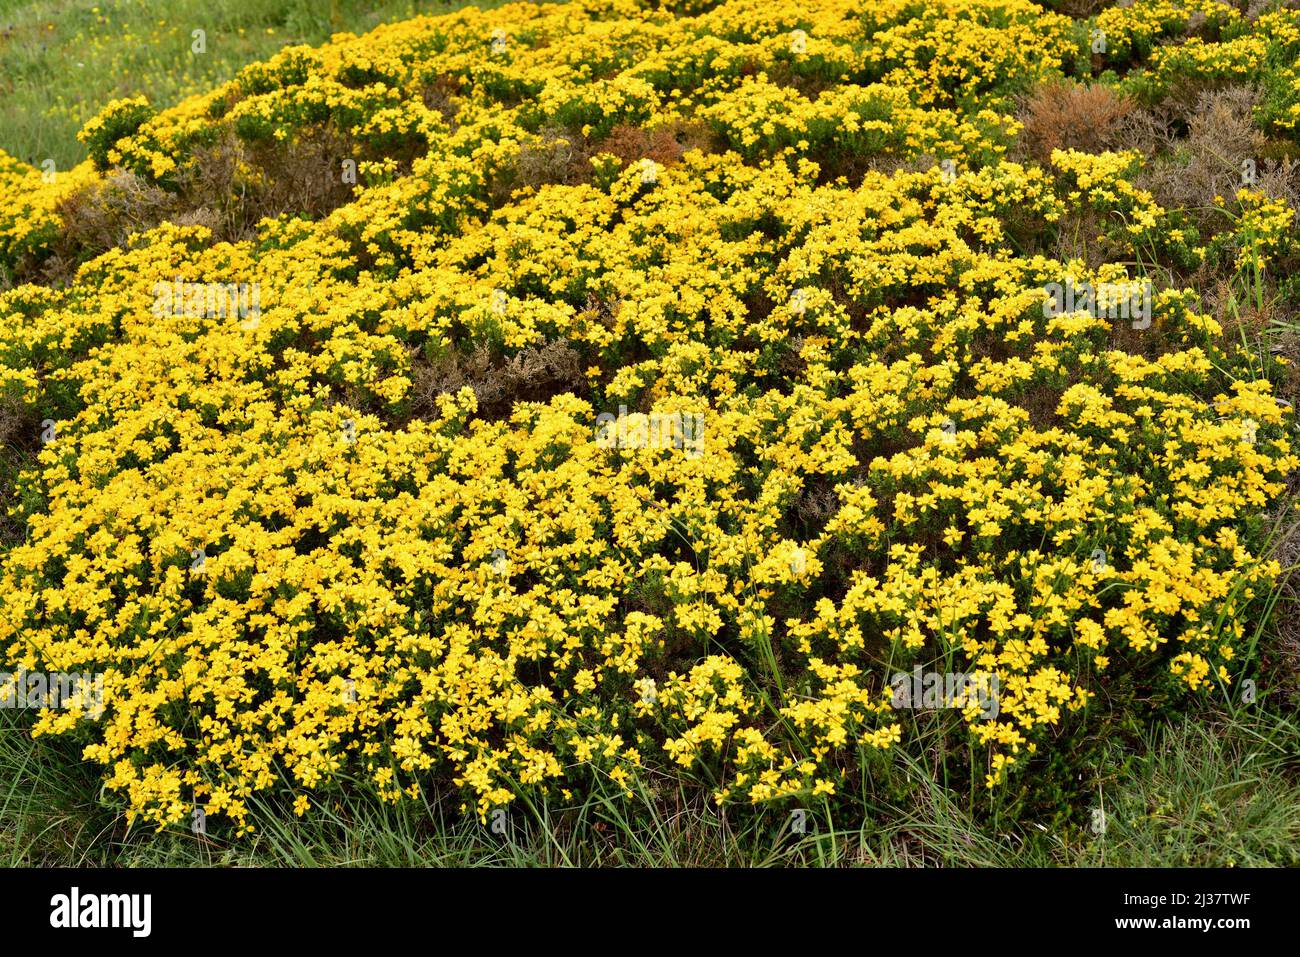 Spanish broom or spanish gorse (Genista hispanica) is a spiny shrub native to northern and eastern Spain and southern France. This photo was taken in Stock Photo